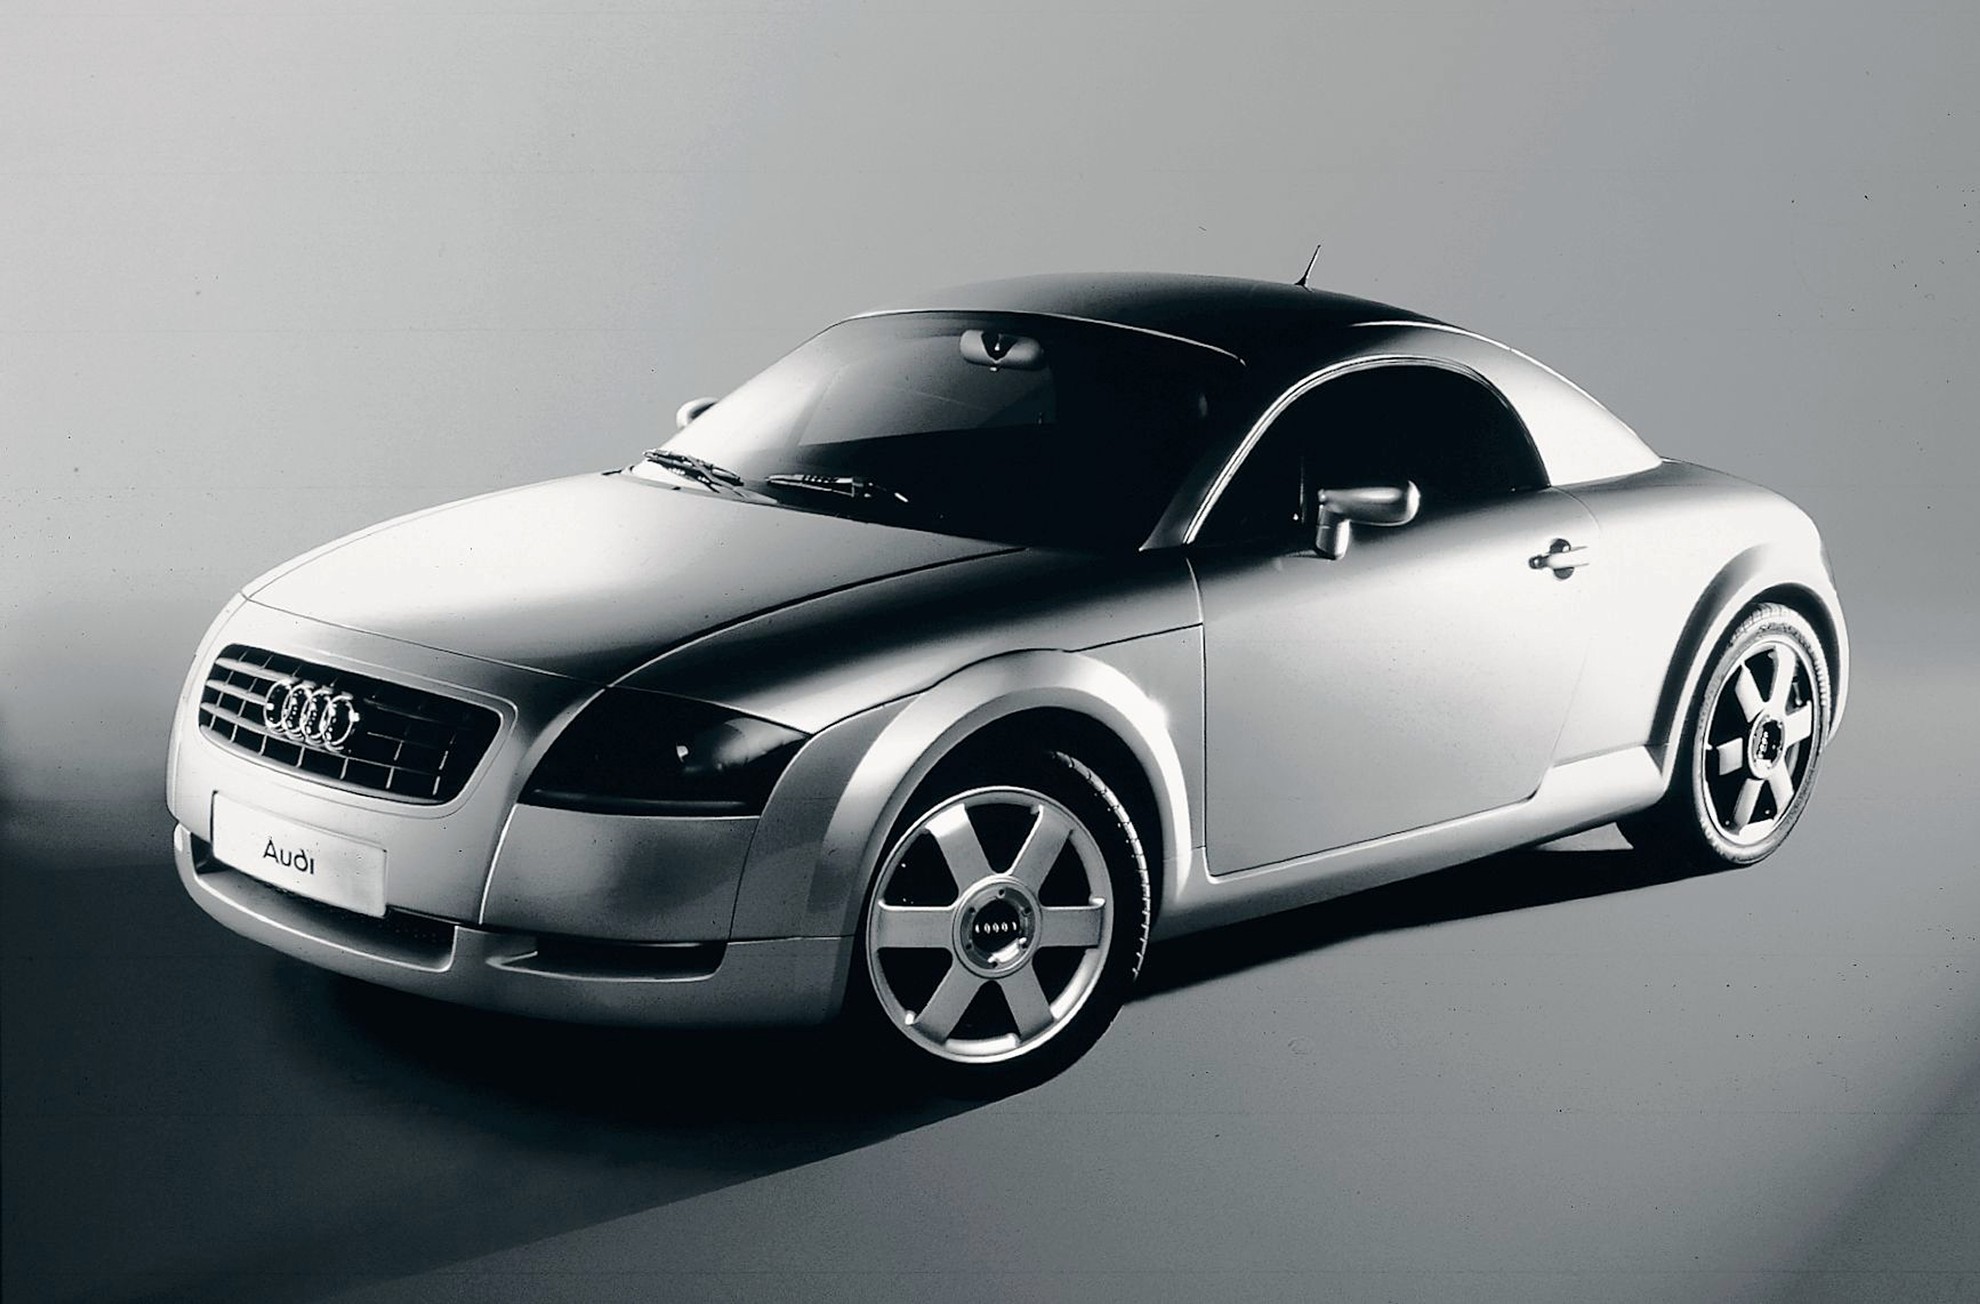 Audi museum mobile: history and stories about the Audi TT